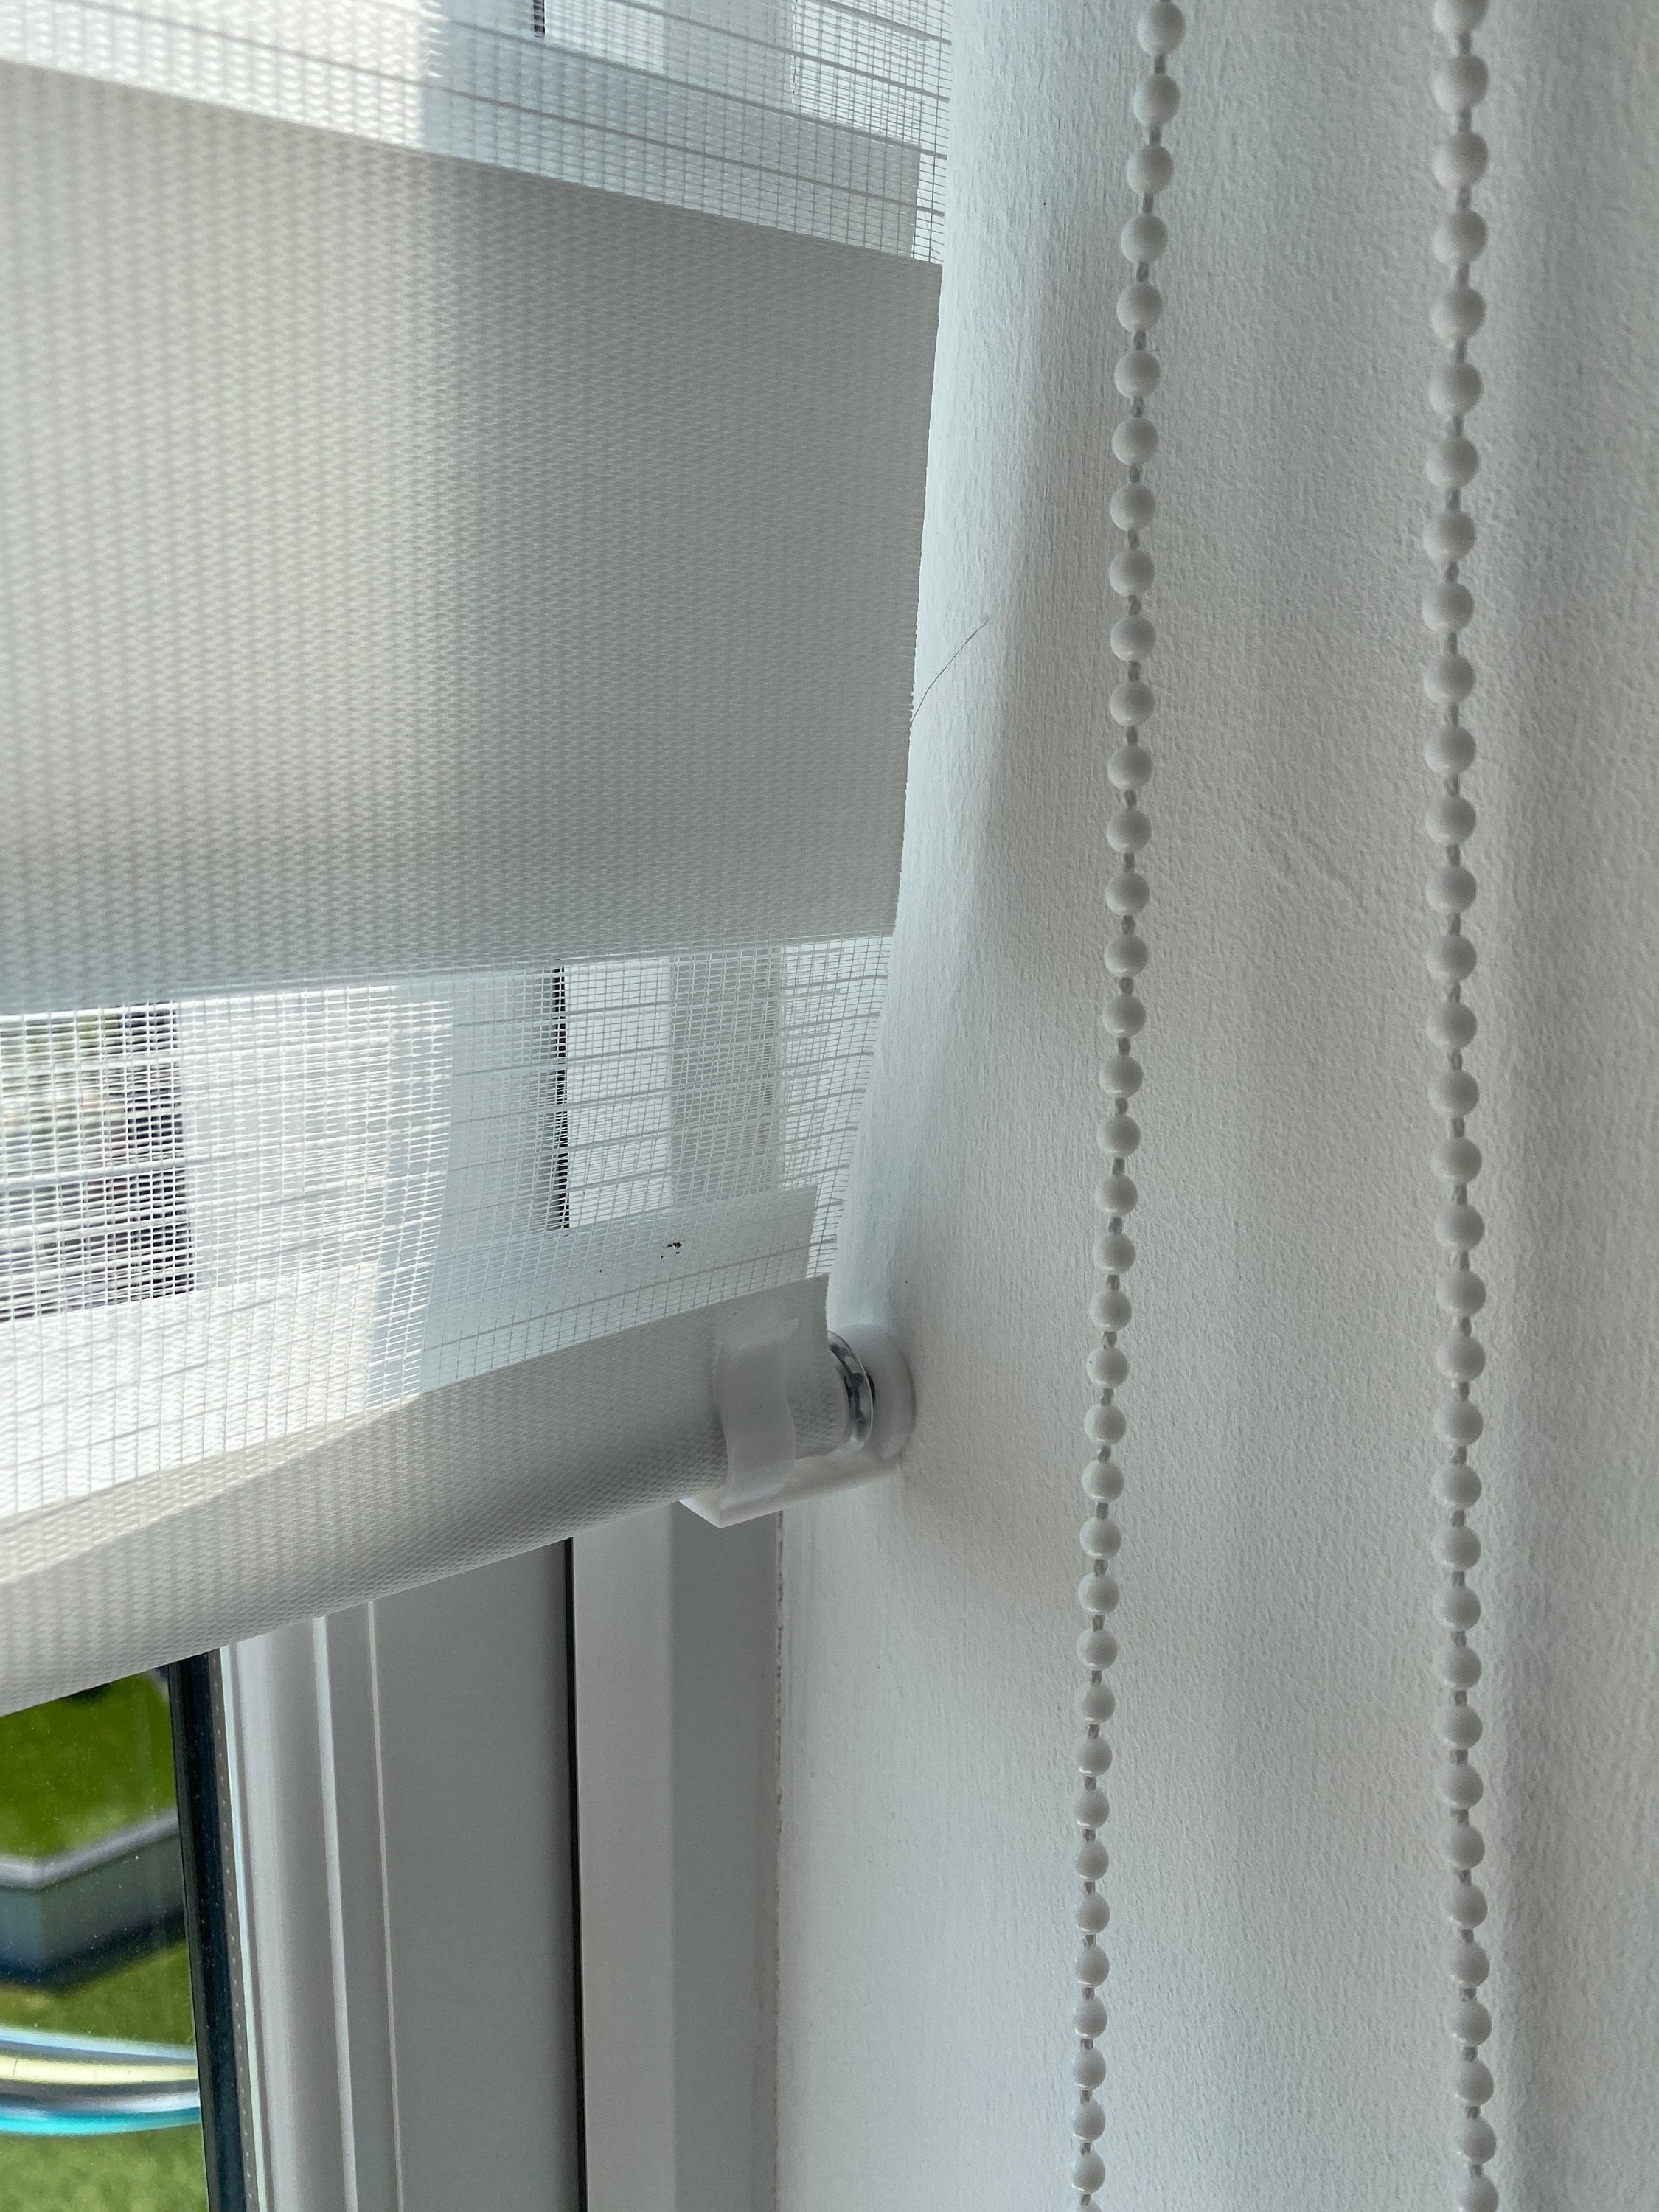 Roller Blind Repair Kit Brackets and Chain for 25mm Internal